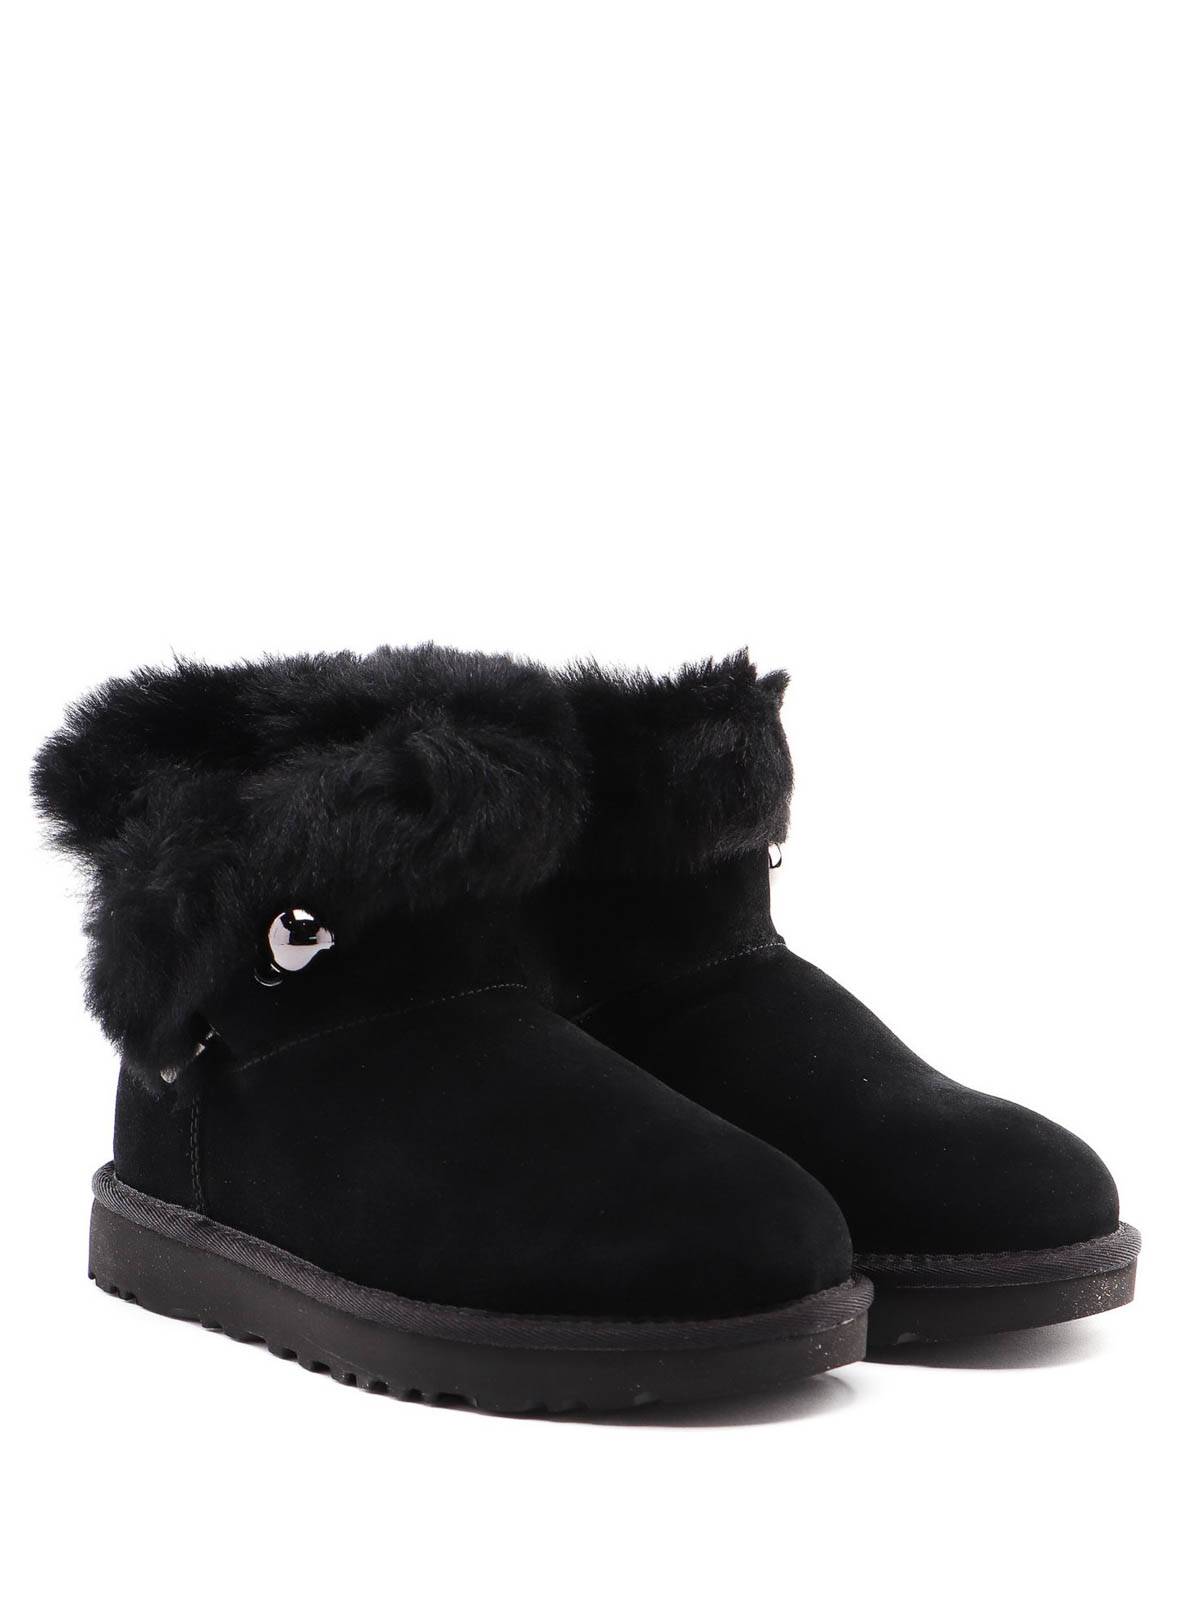 Ankle boots Ugg - Black Classic Fluff Pin Mini ankle boots - 1105609BLACK